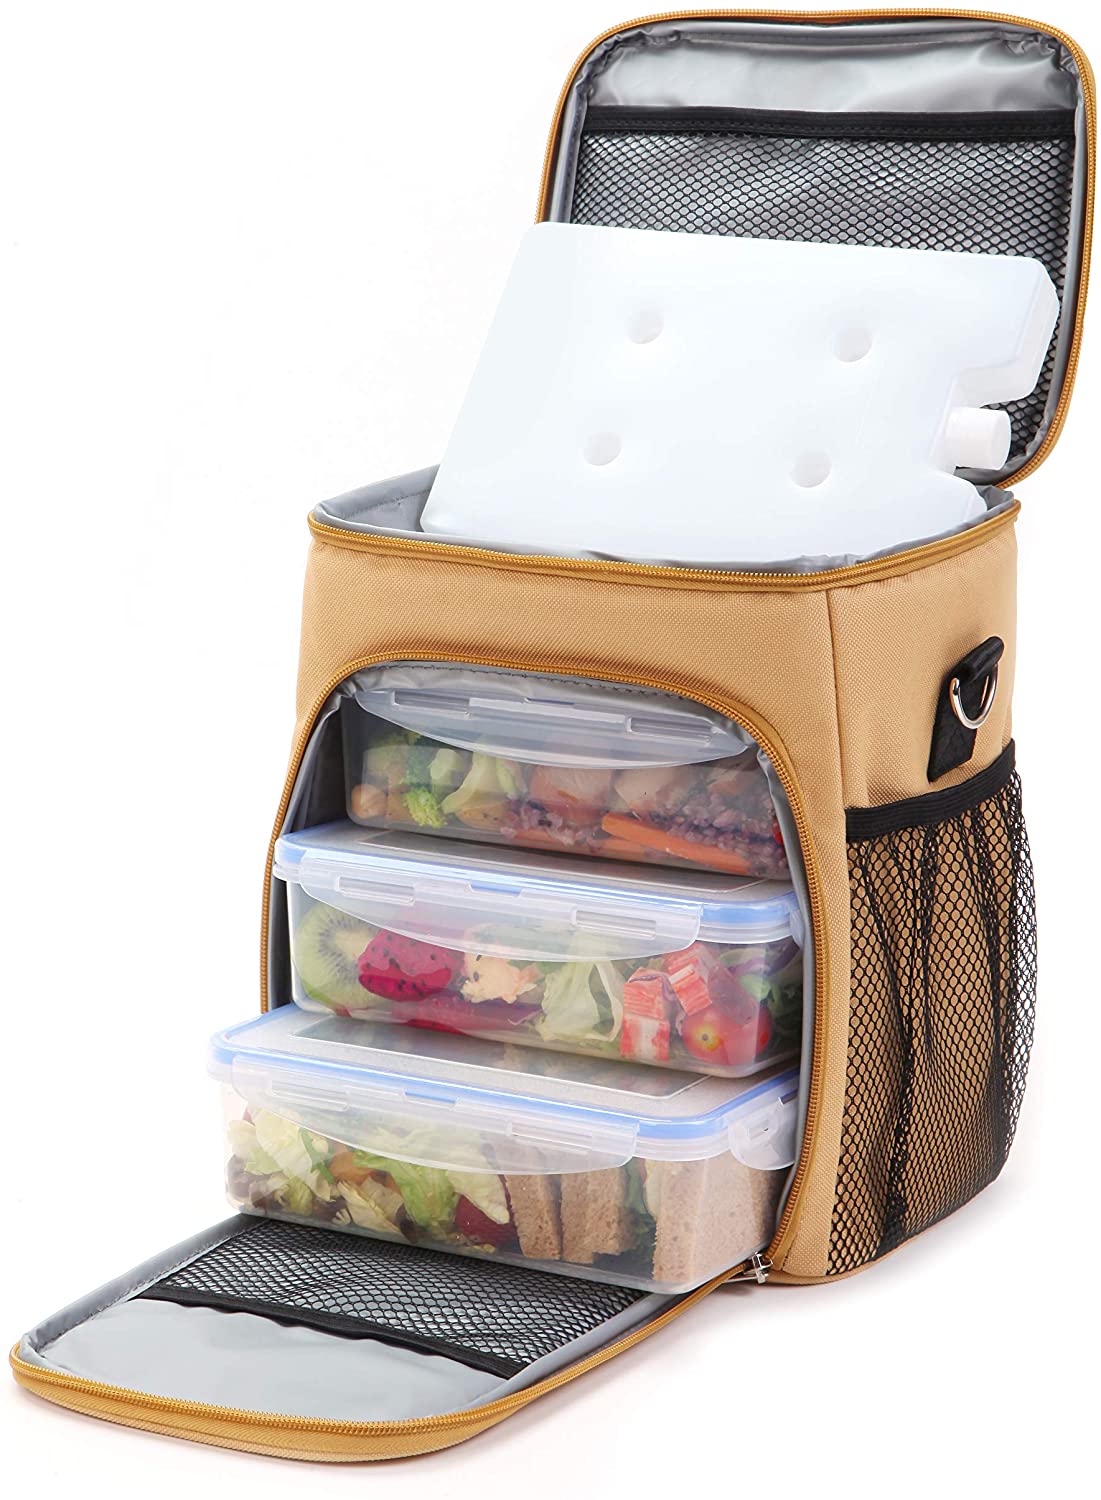 Black Dual Compartment Insulated Cooler Lunch Bag Includes 3 Large Meal Prep Containers Ice Pack Saladays Lunch Box For Men Adjustable /& Detachable Shoulder Strap